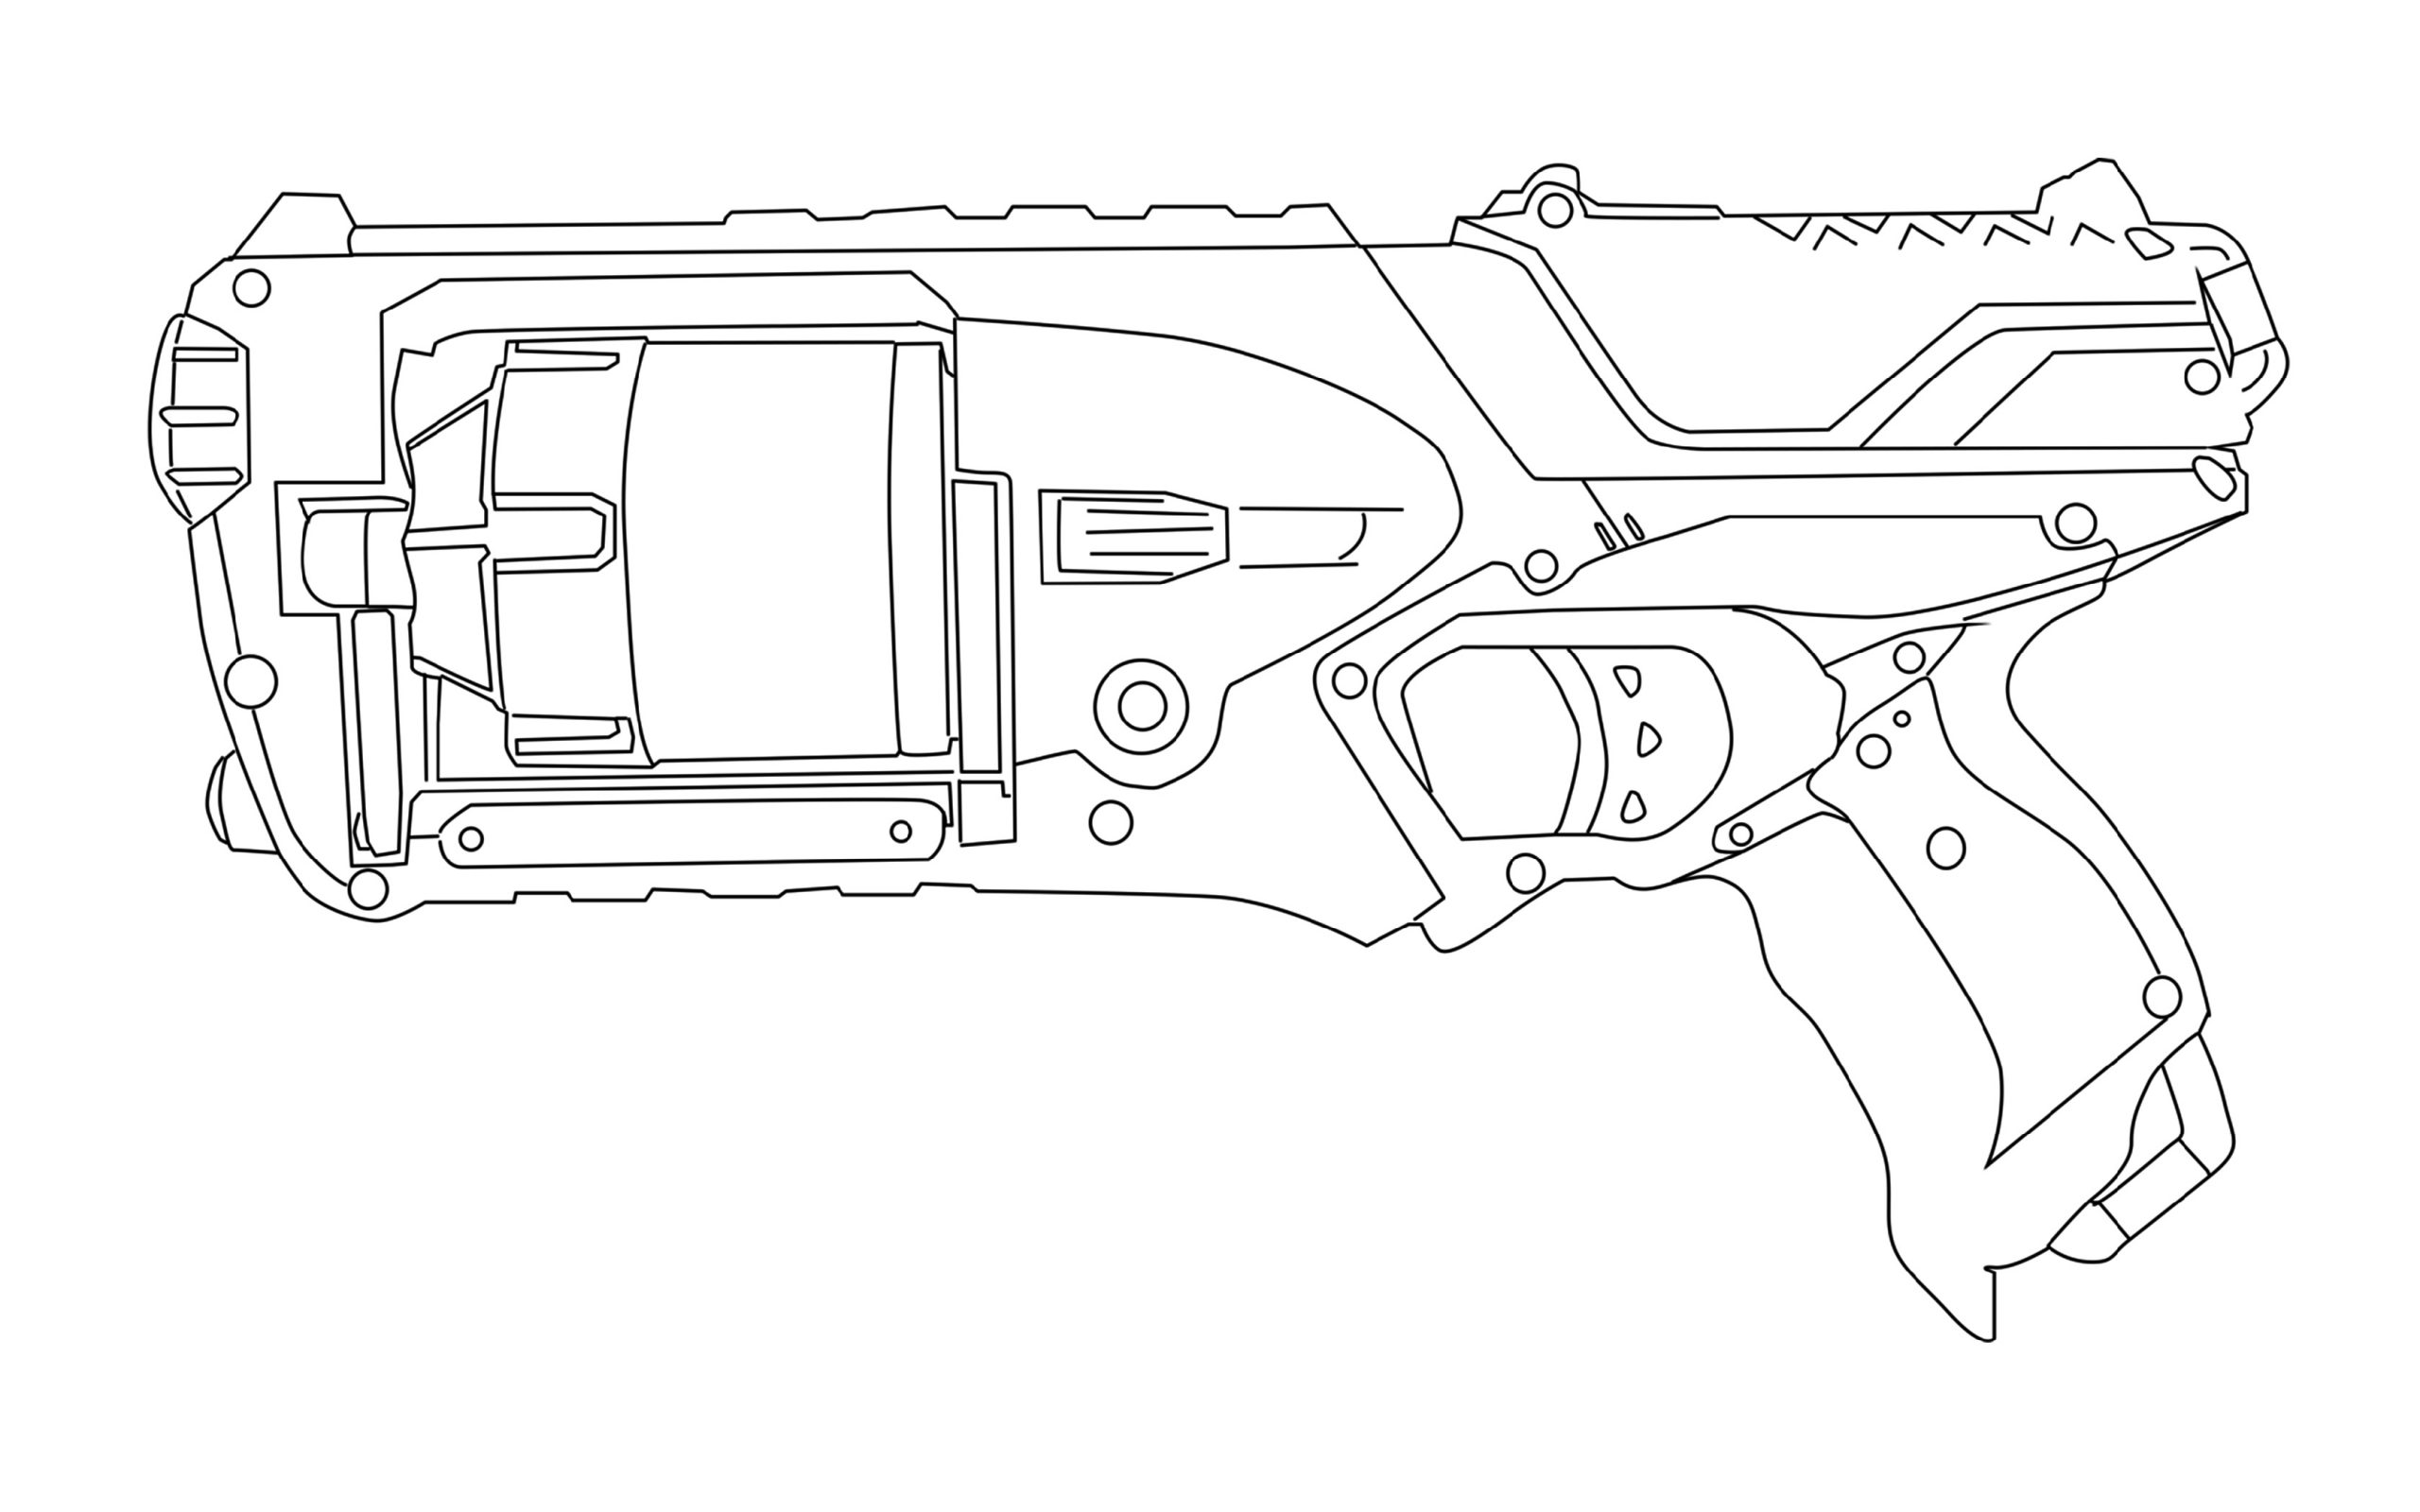 NERF Logo Black and White - Get Coloring Pages